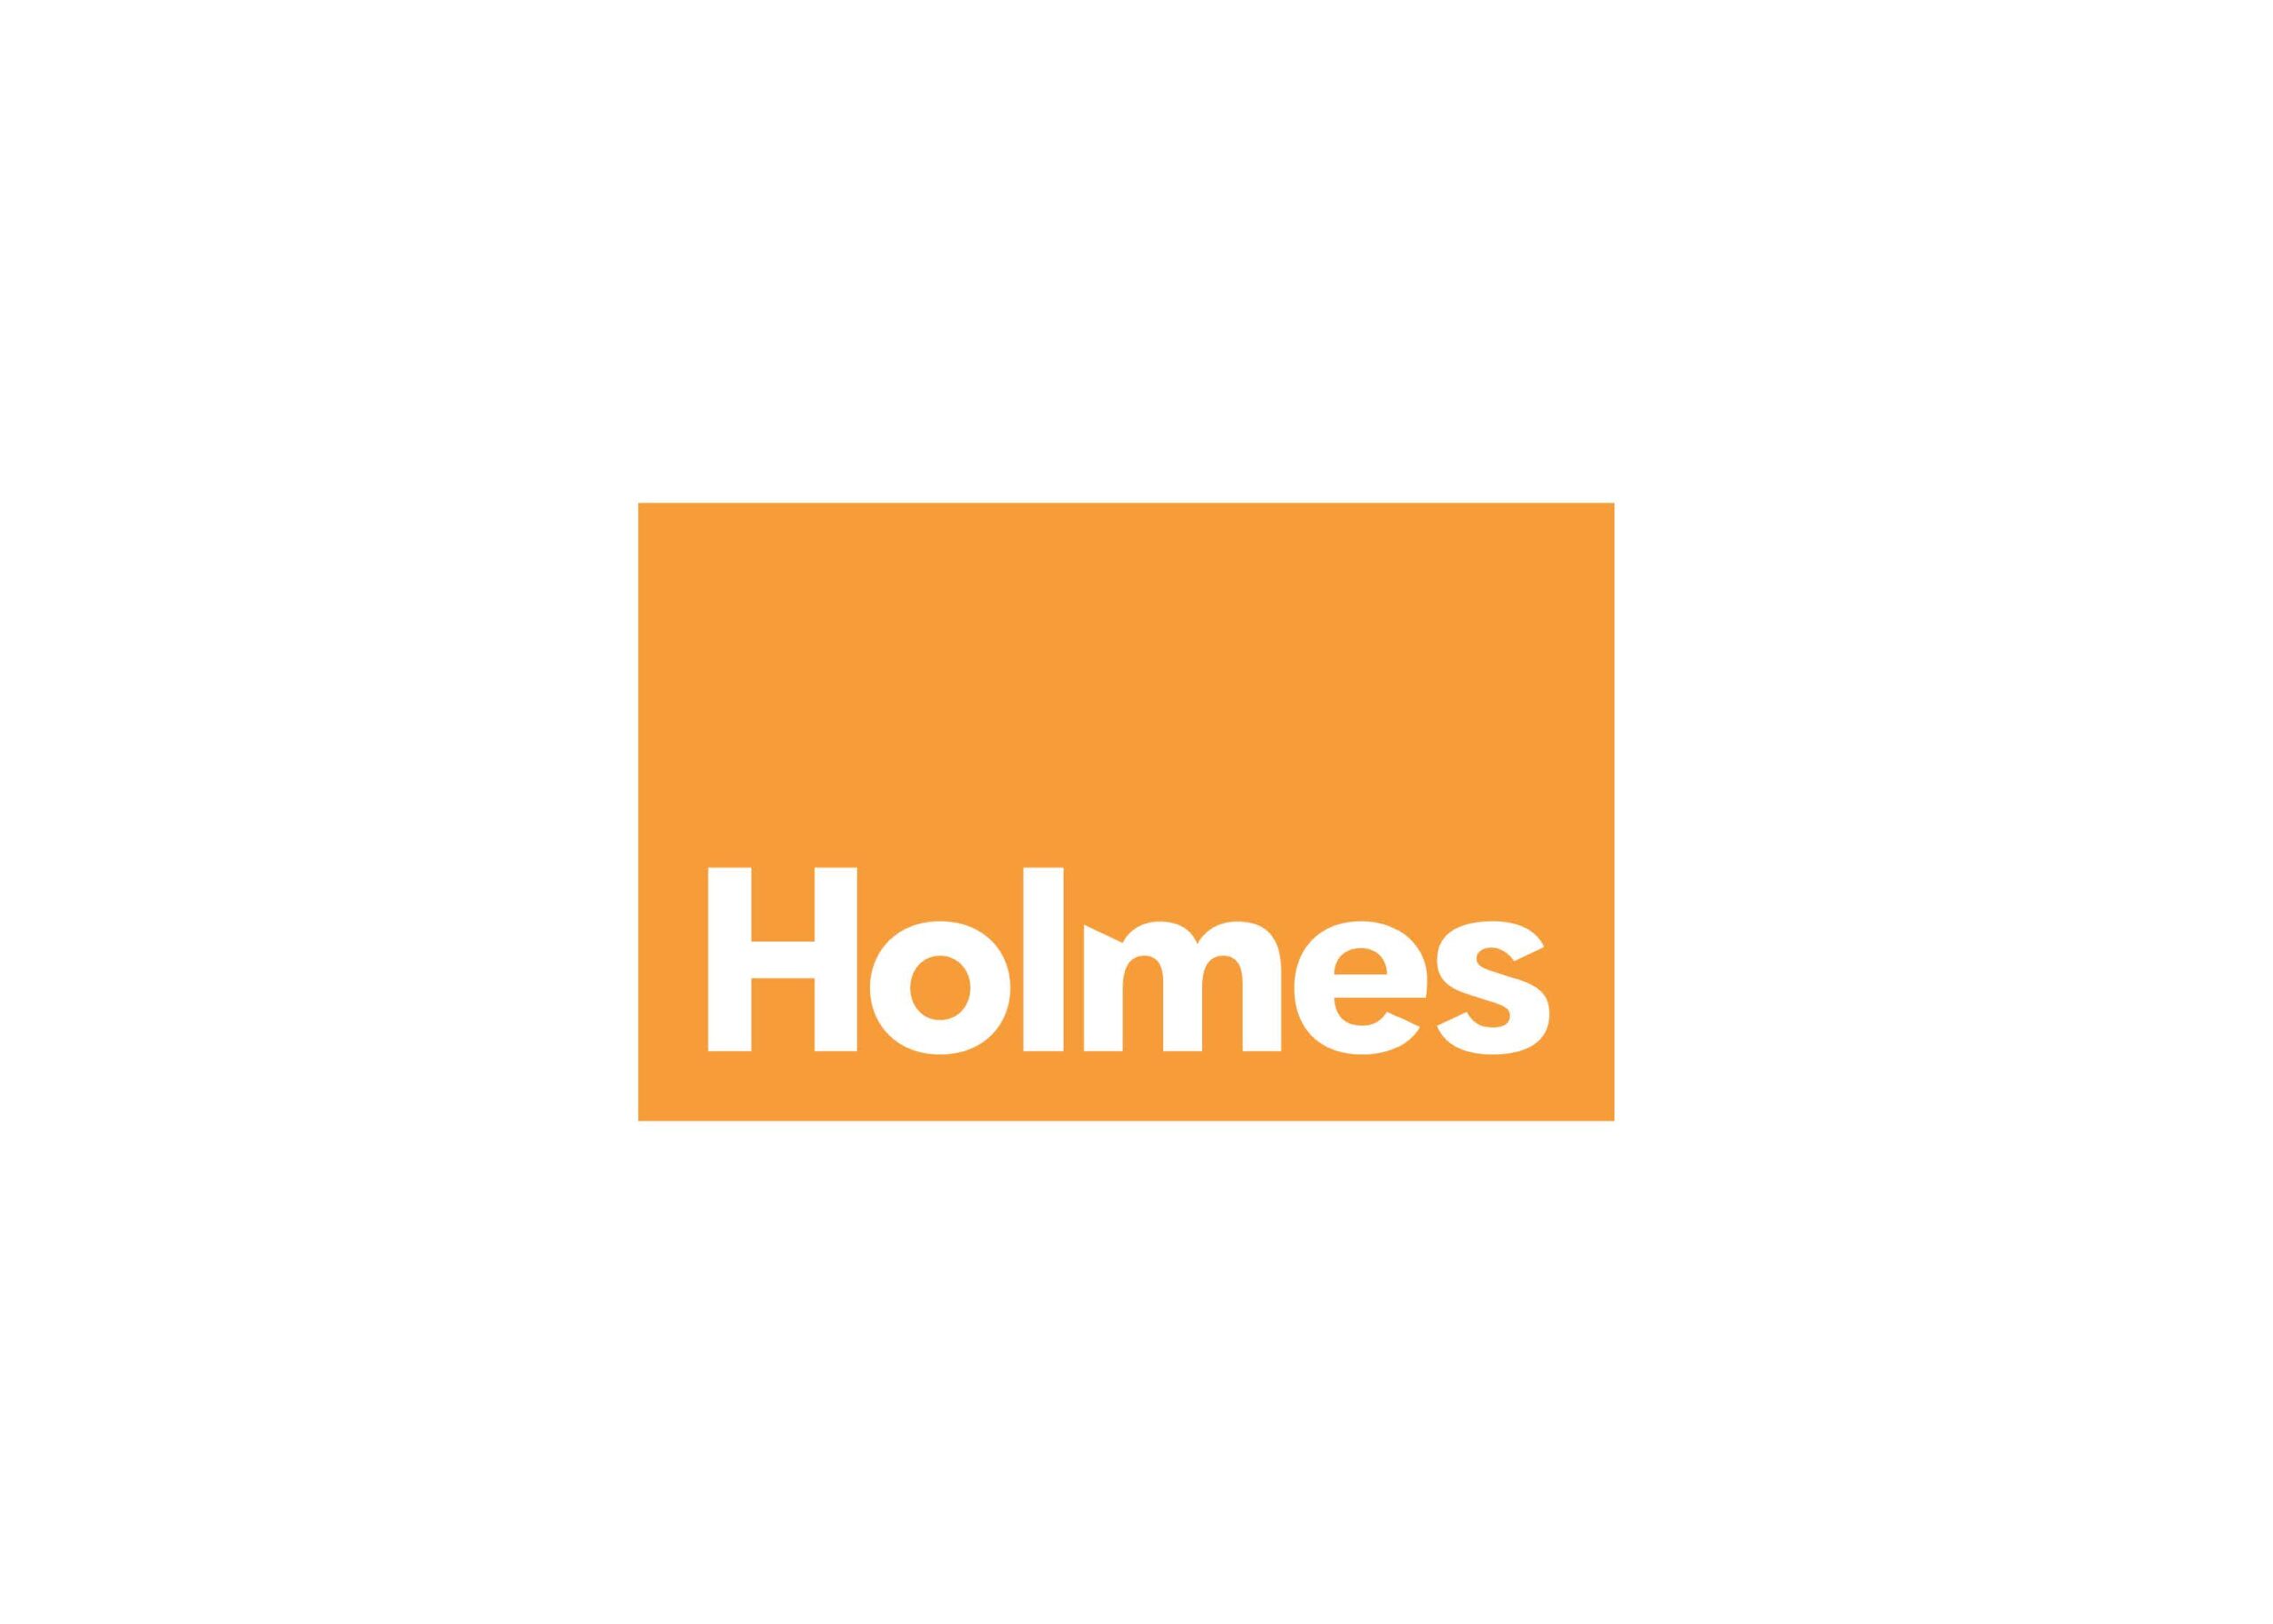 Holmes Solutions